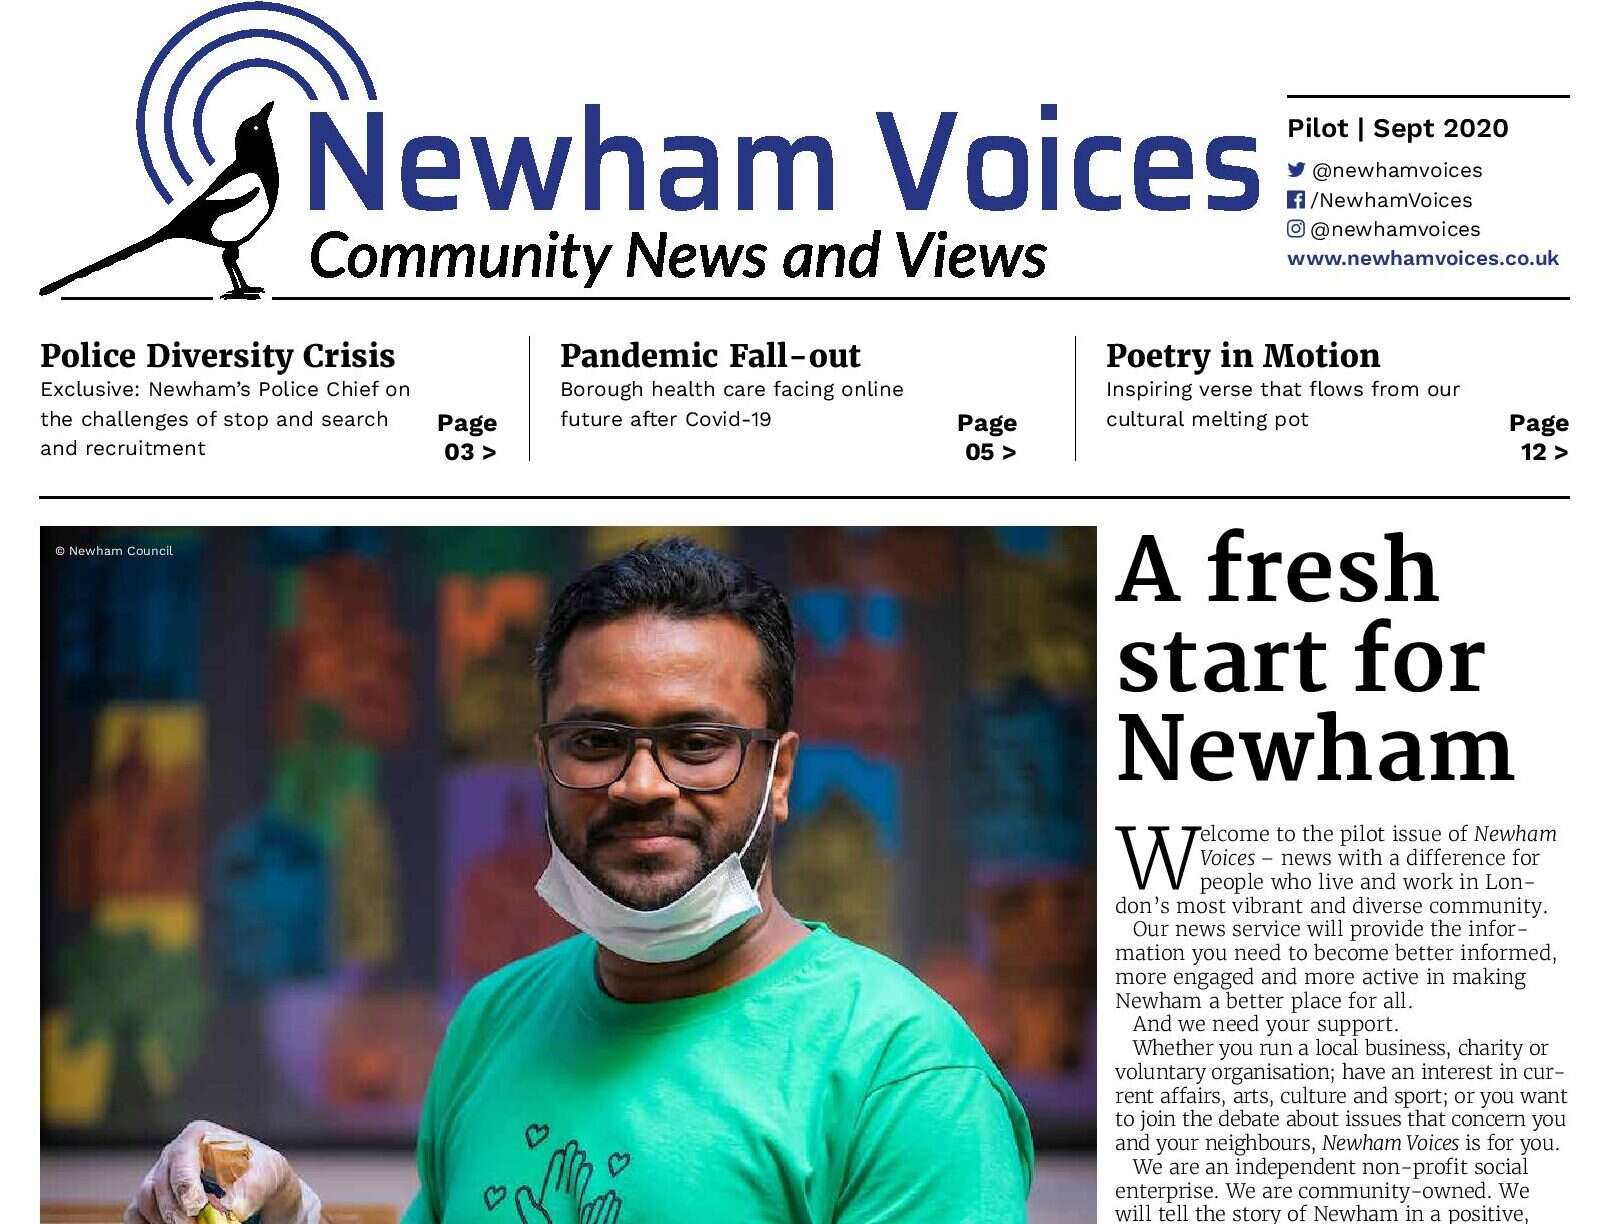 Former IFJ general secretary launches new model for local journalism in Newham, east London